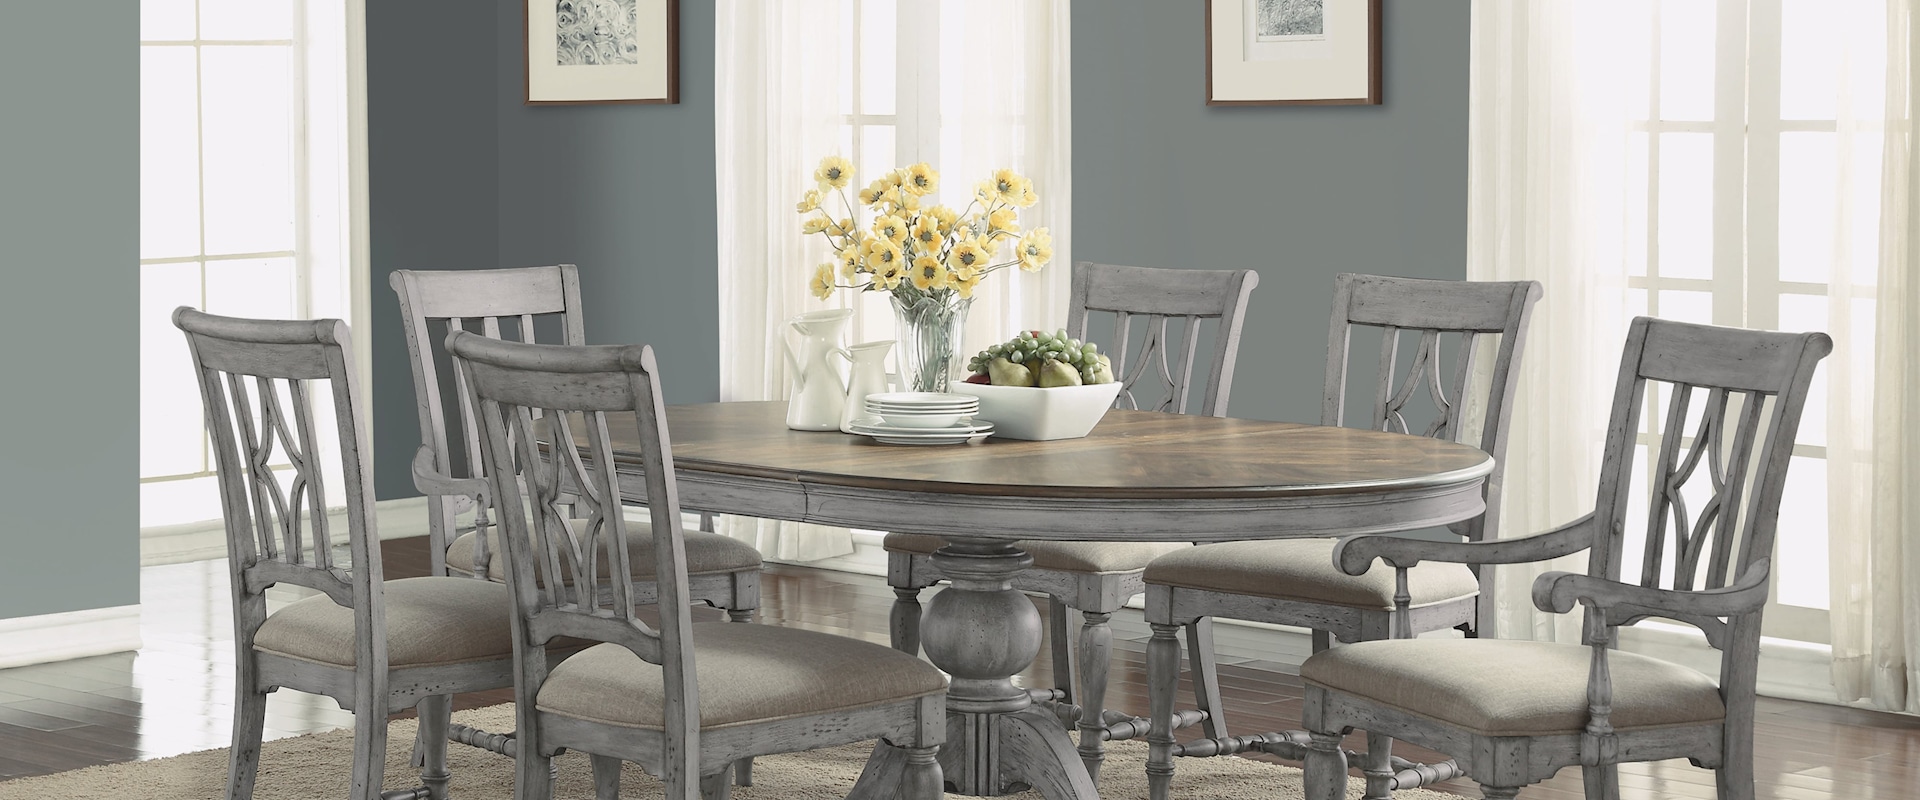 Relaxed Vintage Table and Chair Set with Pedestal Table